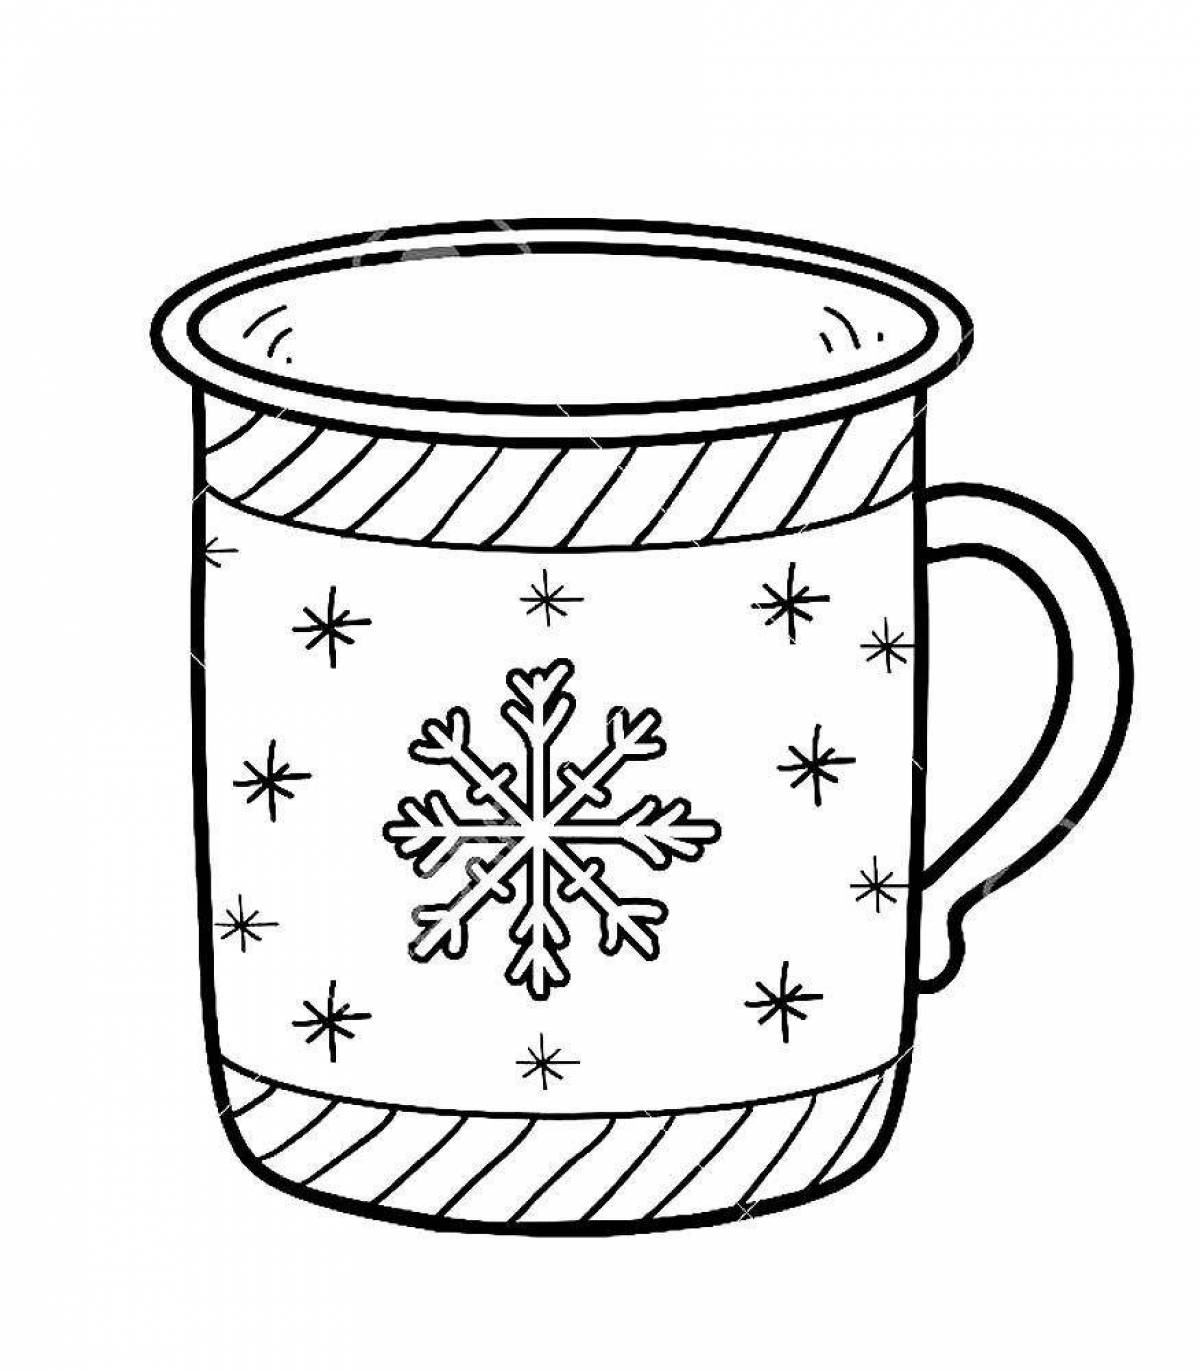 Fun coloring cup for children